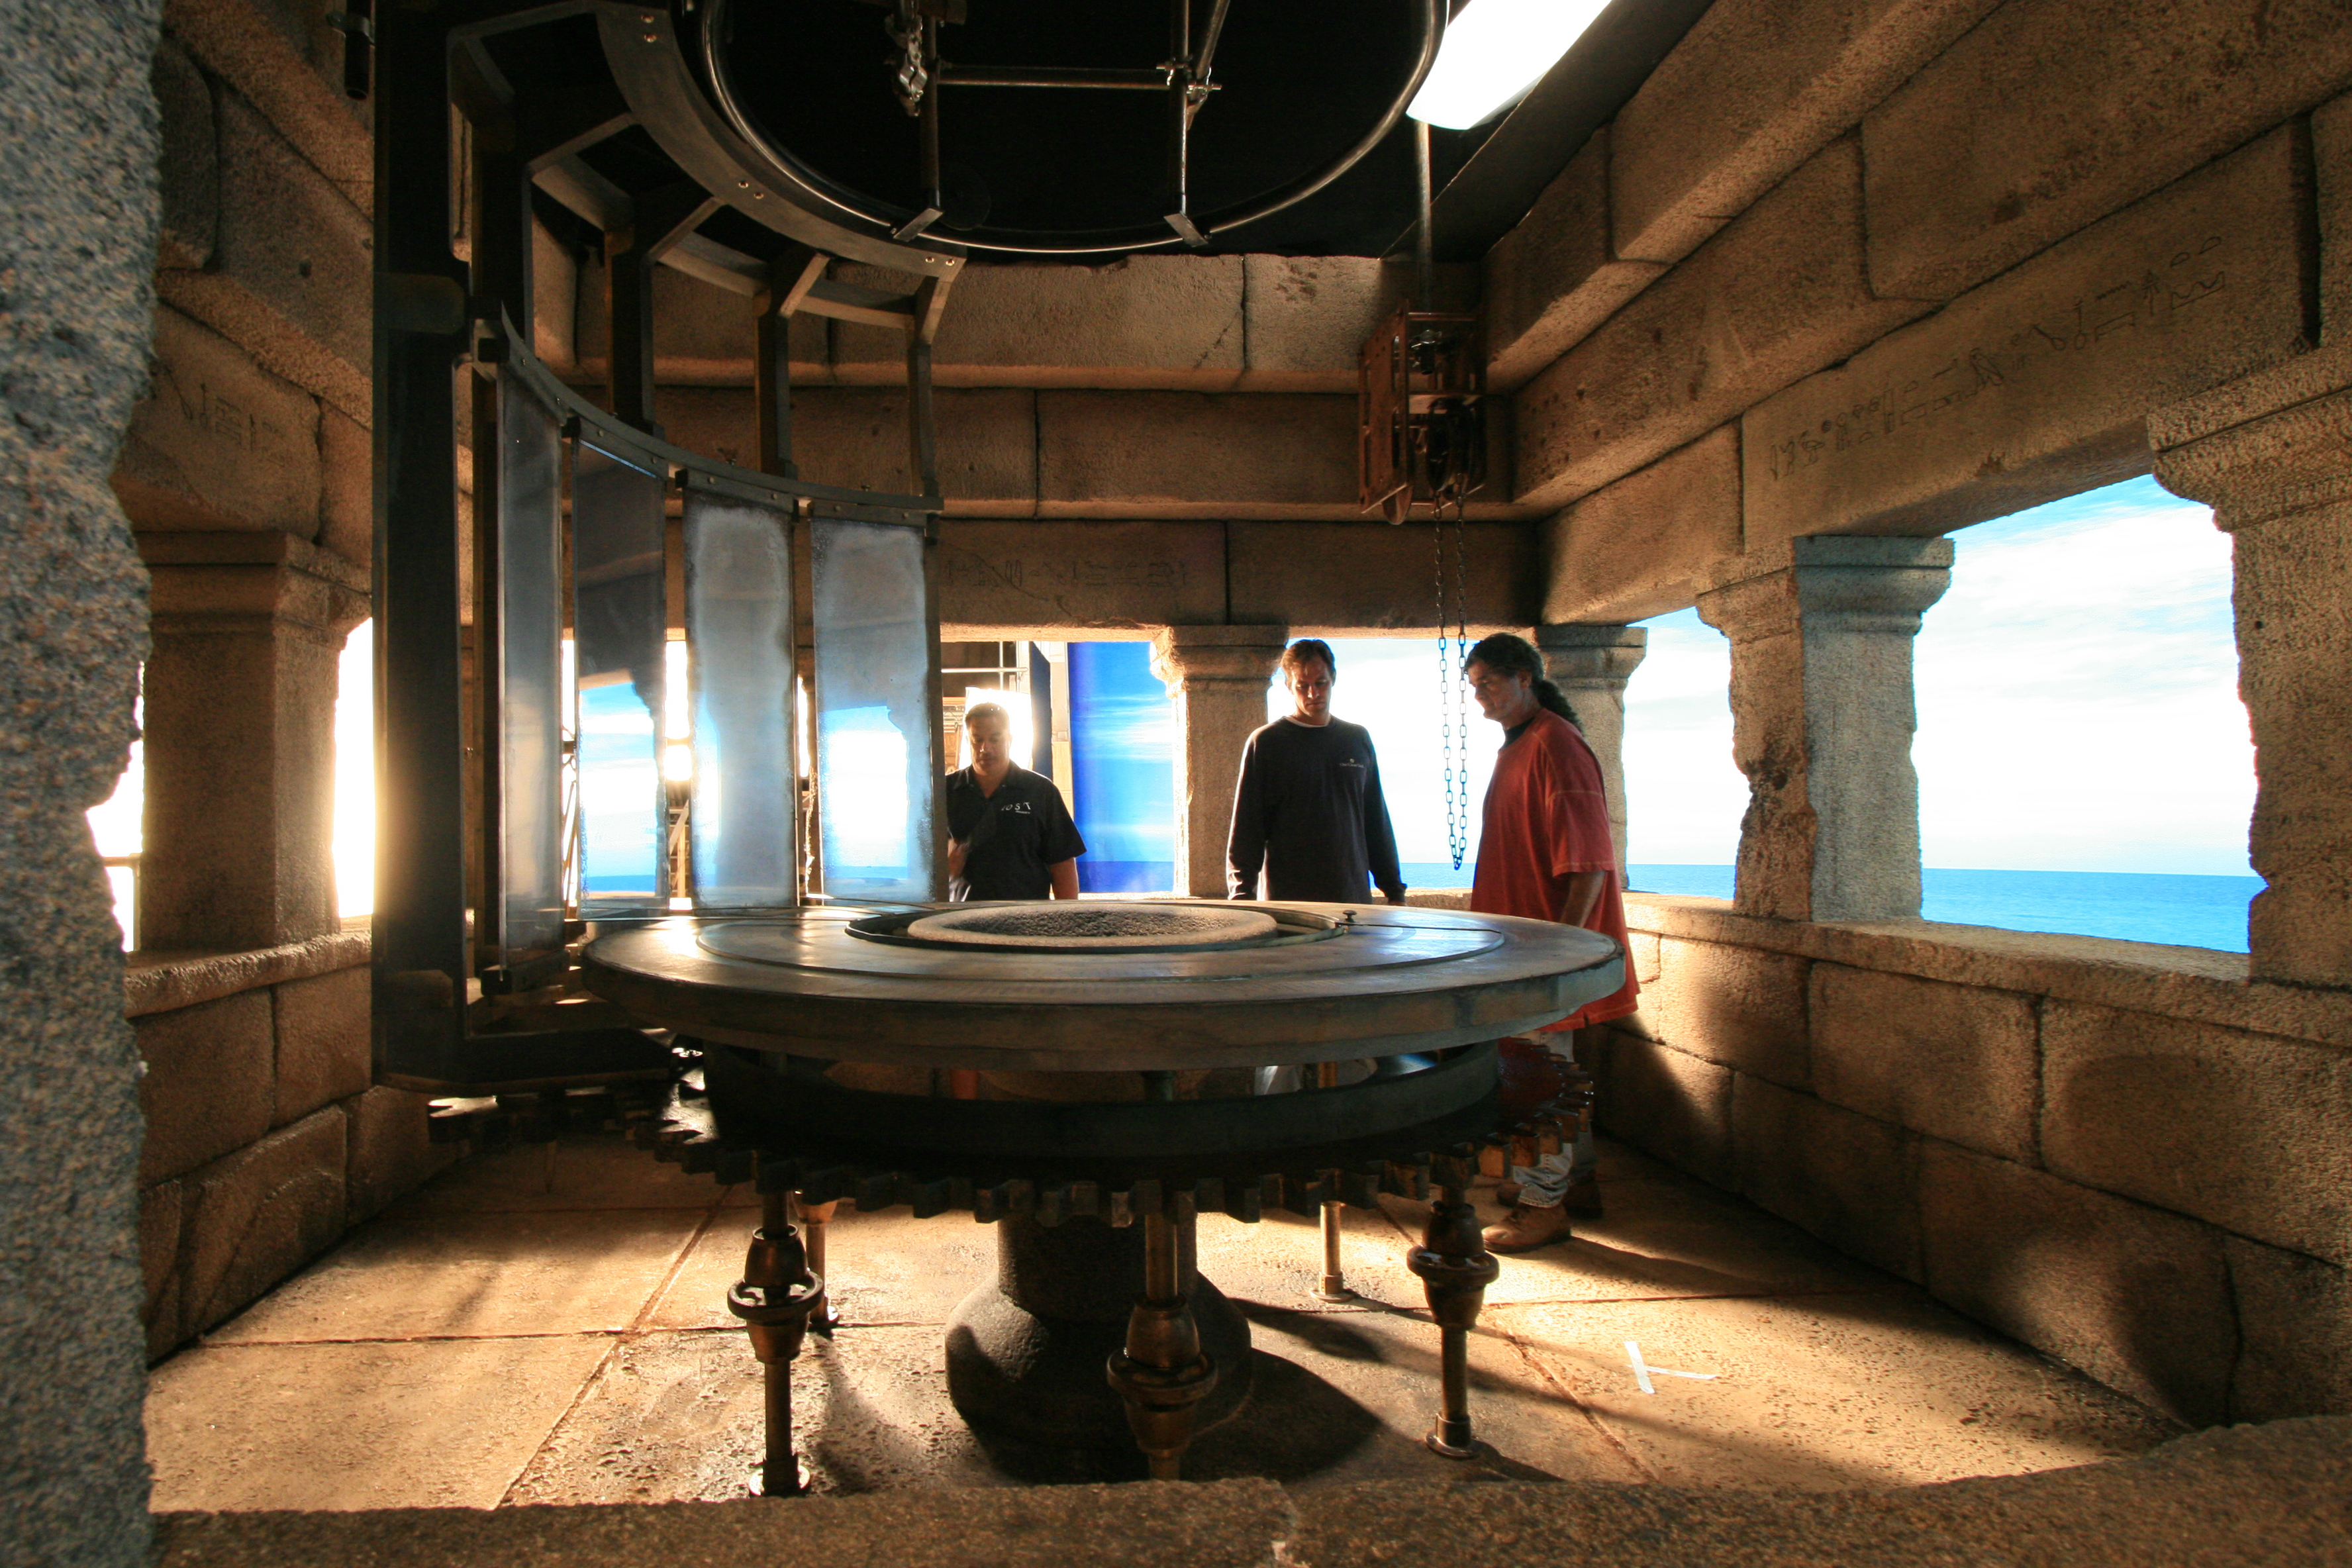 Ancient lighthouse with rotating array of mirrors. Built on stage with translight backing for 